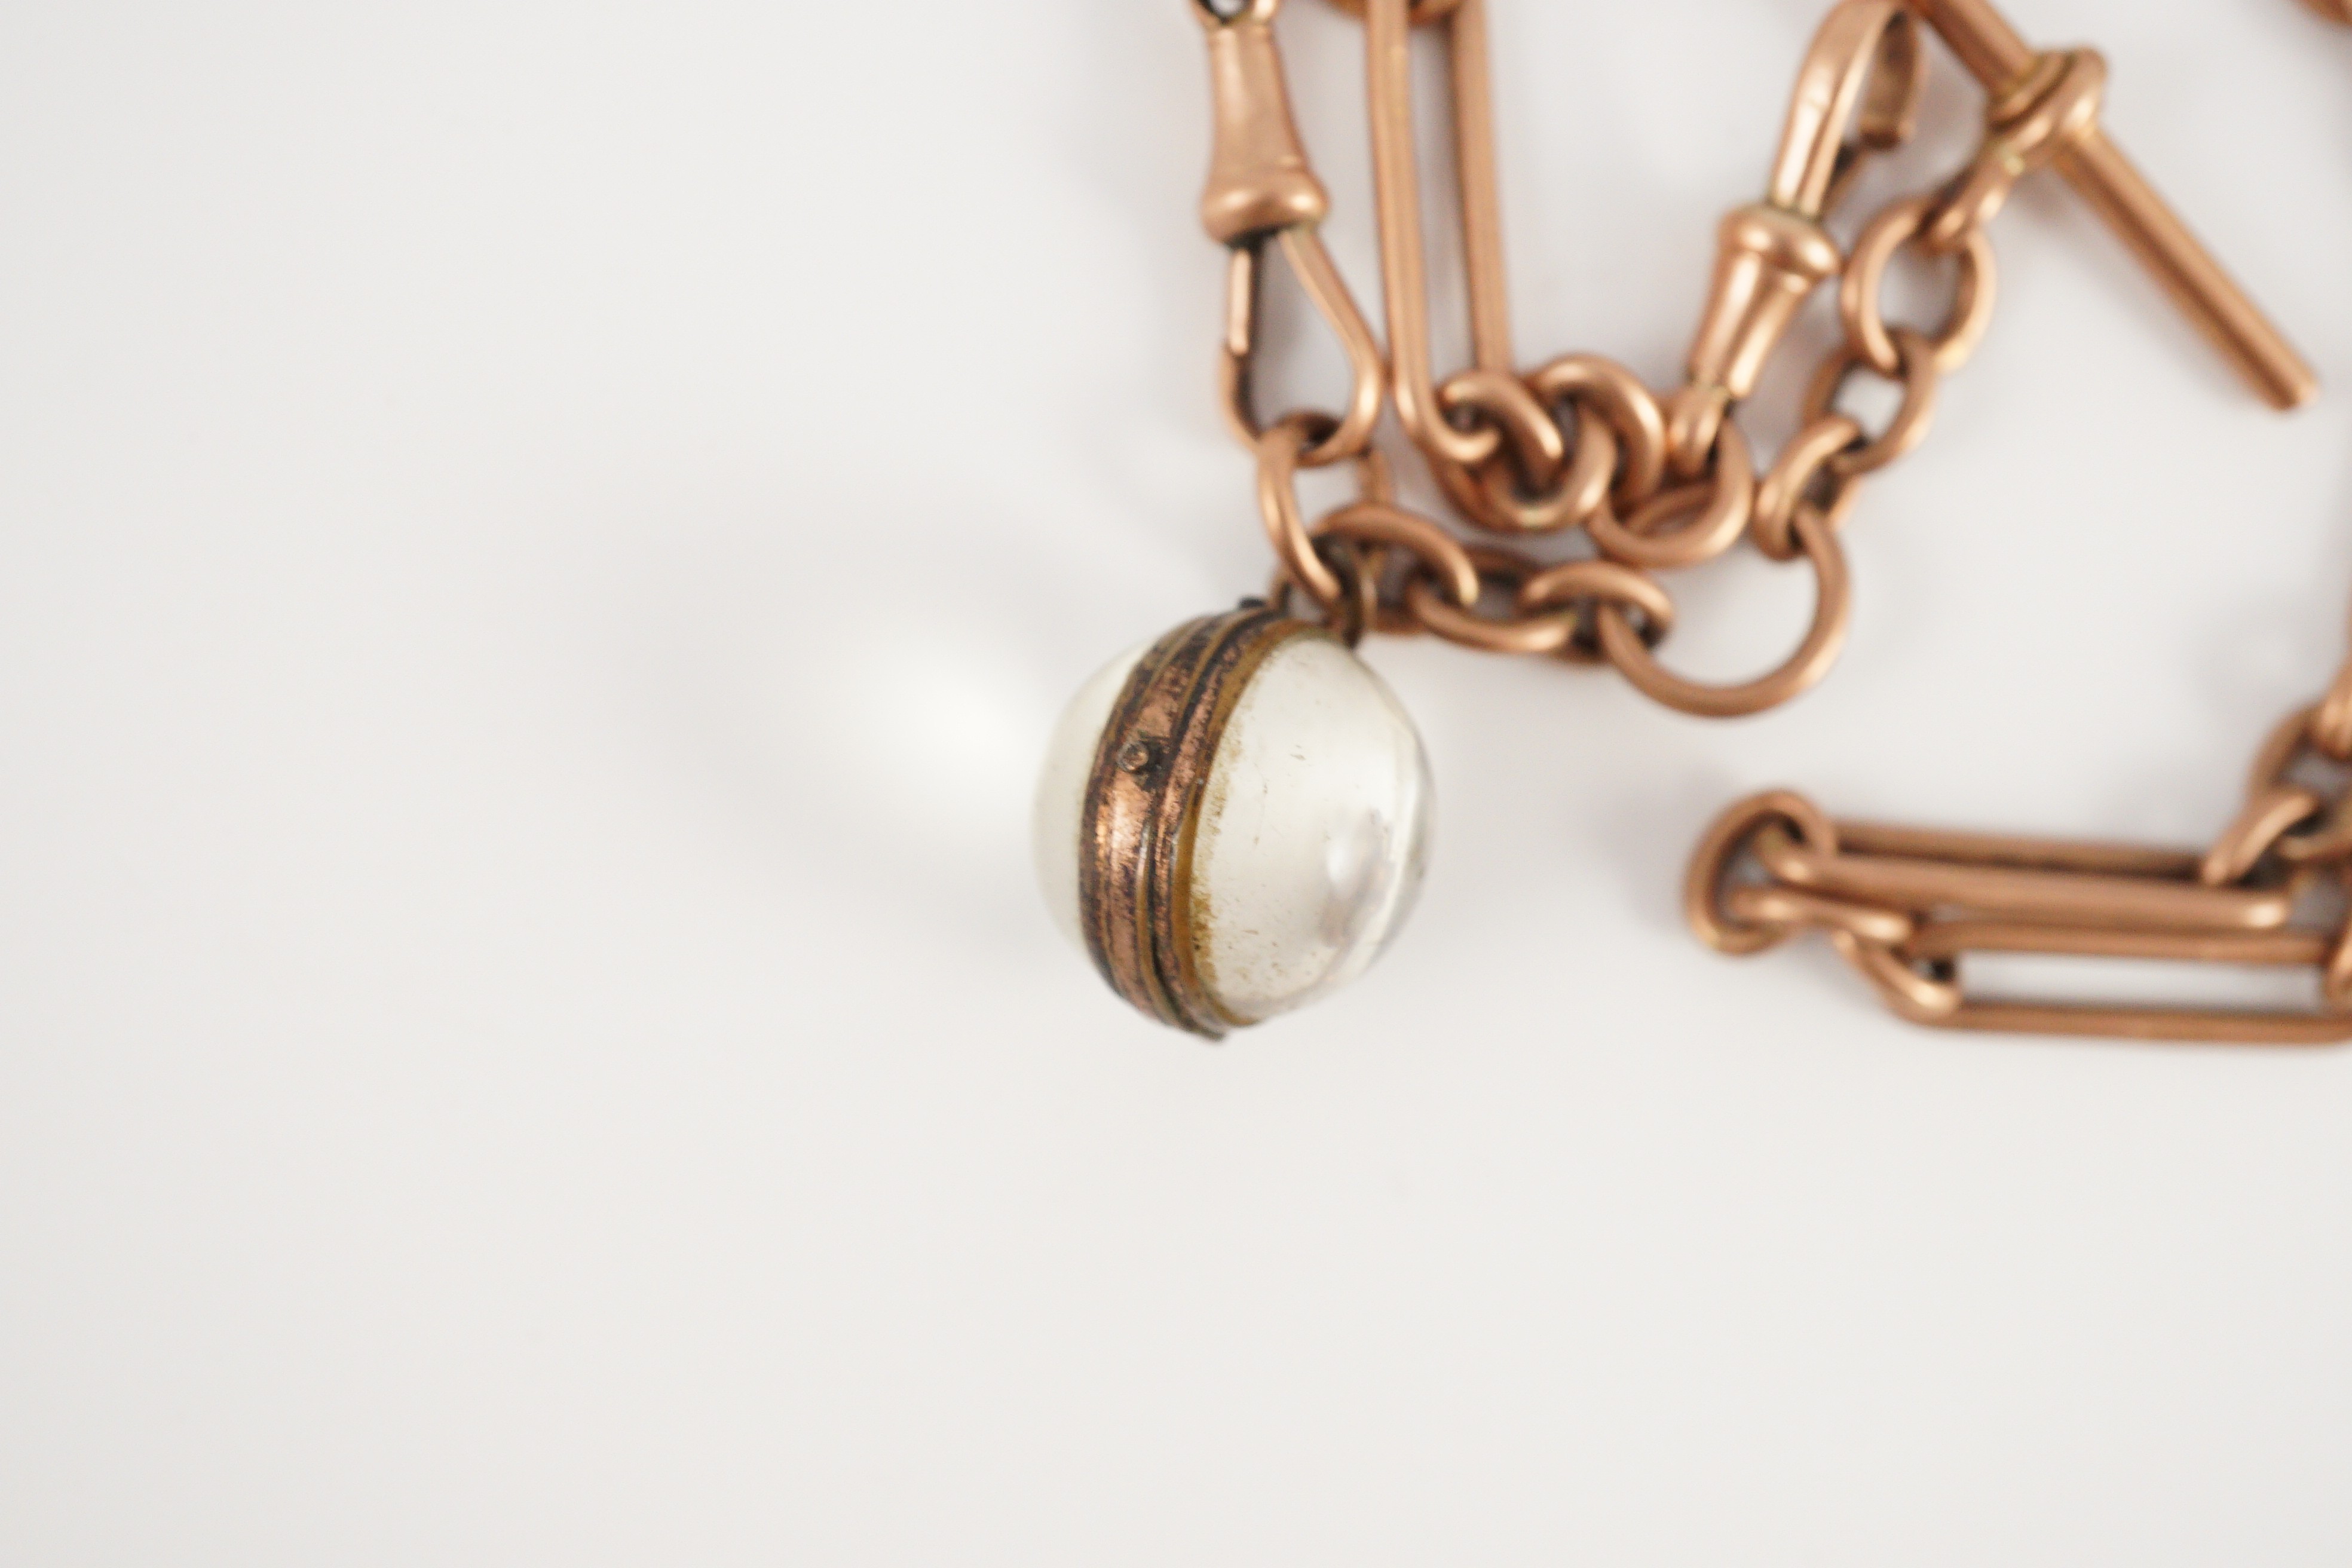 An early 20th century 9ct gold albert with magnified lens fob